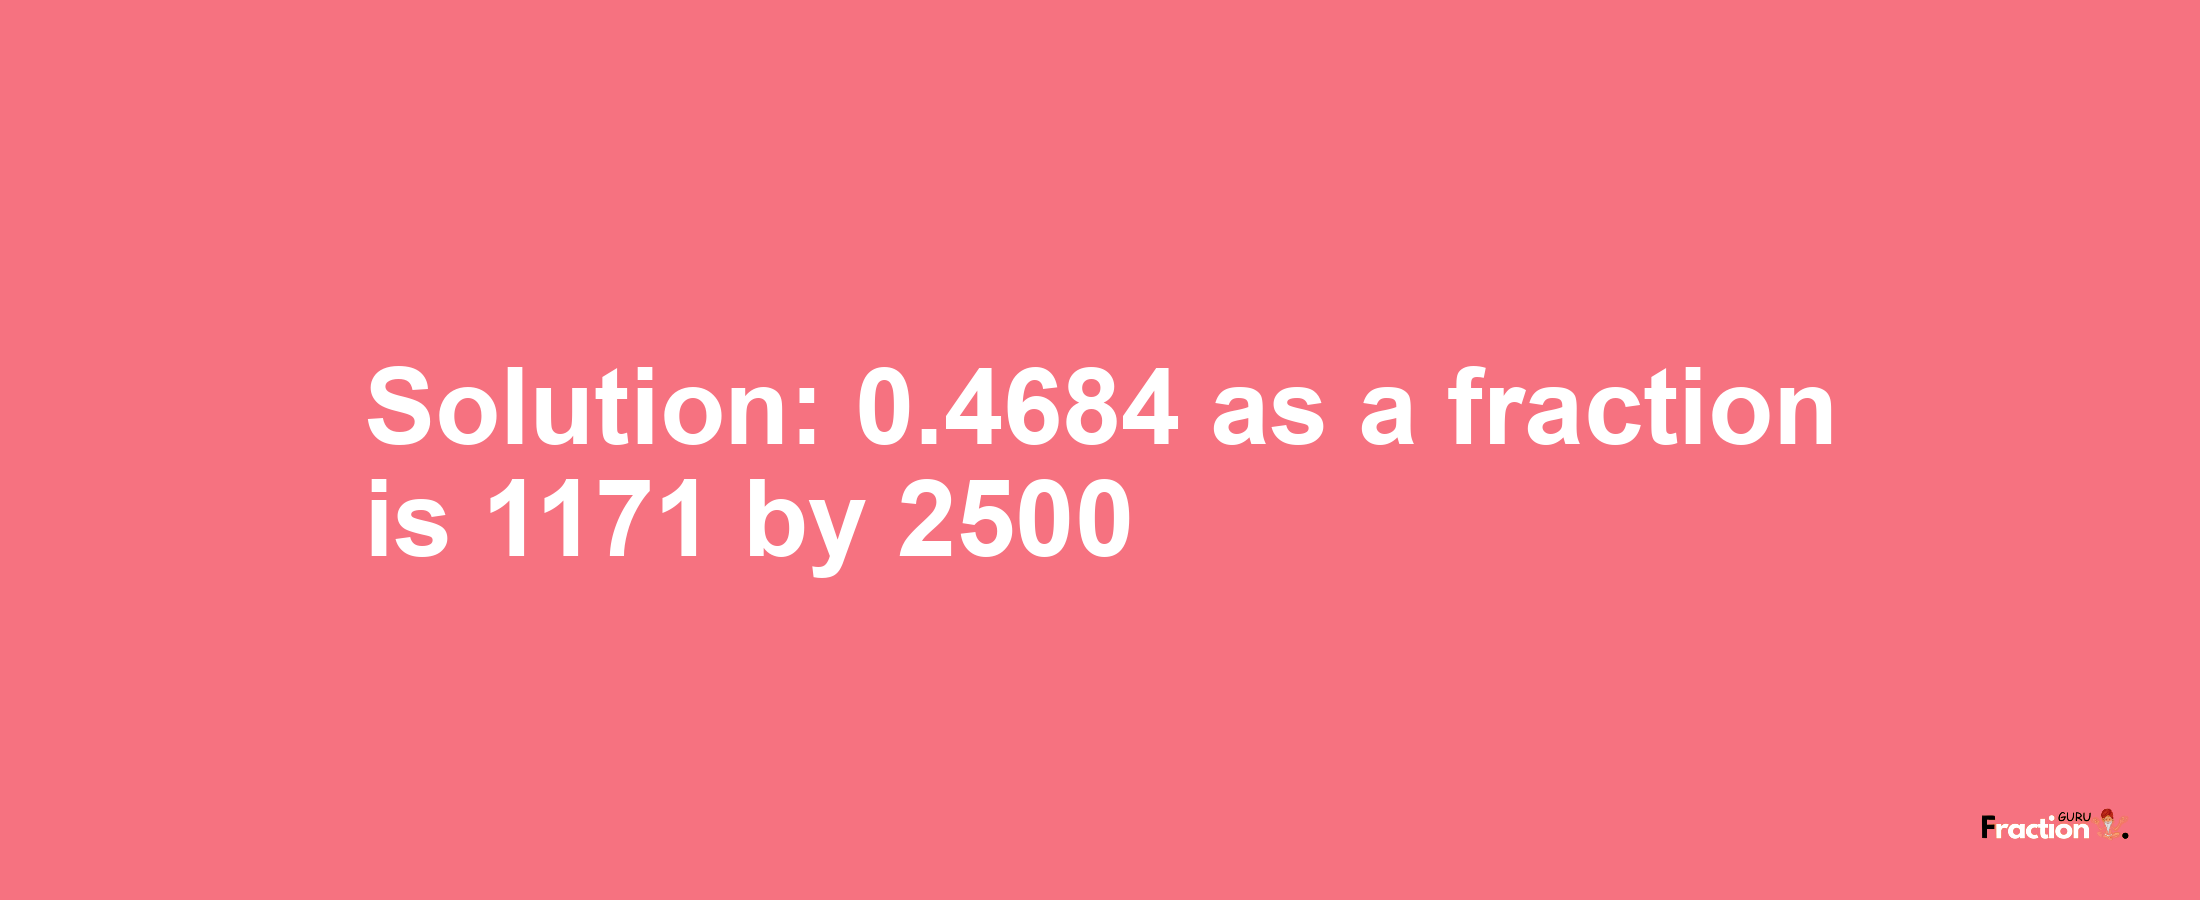 Solution:0.4684 as a fraction is 1171/2500